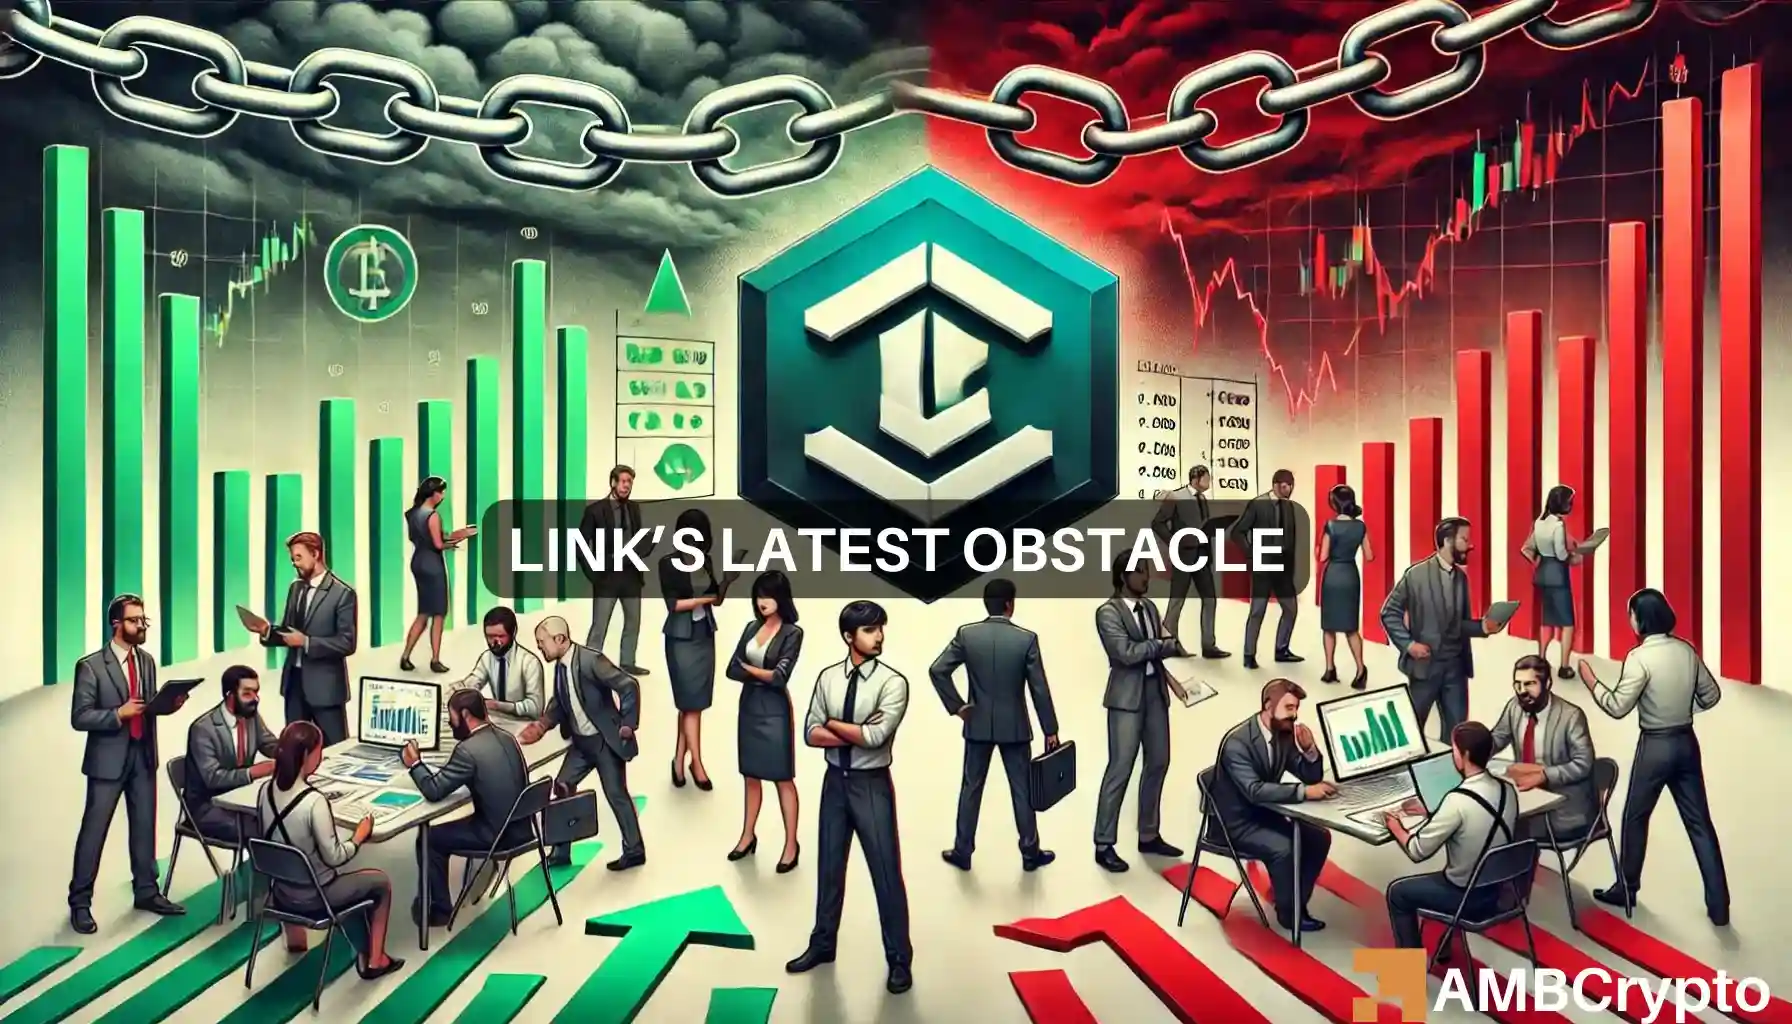 Chainlink crosses $12.8: What’s next – $15 or $11?